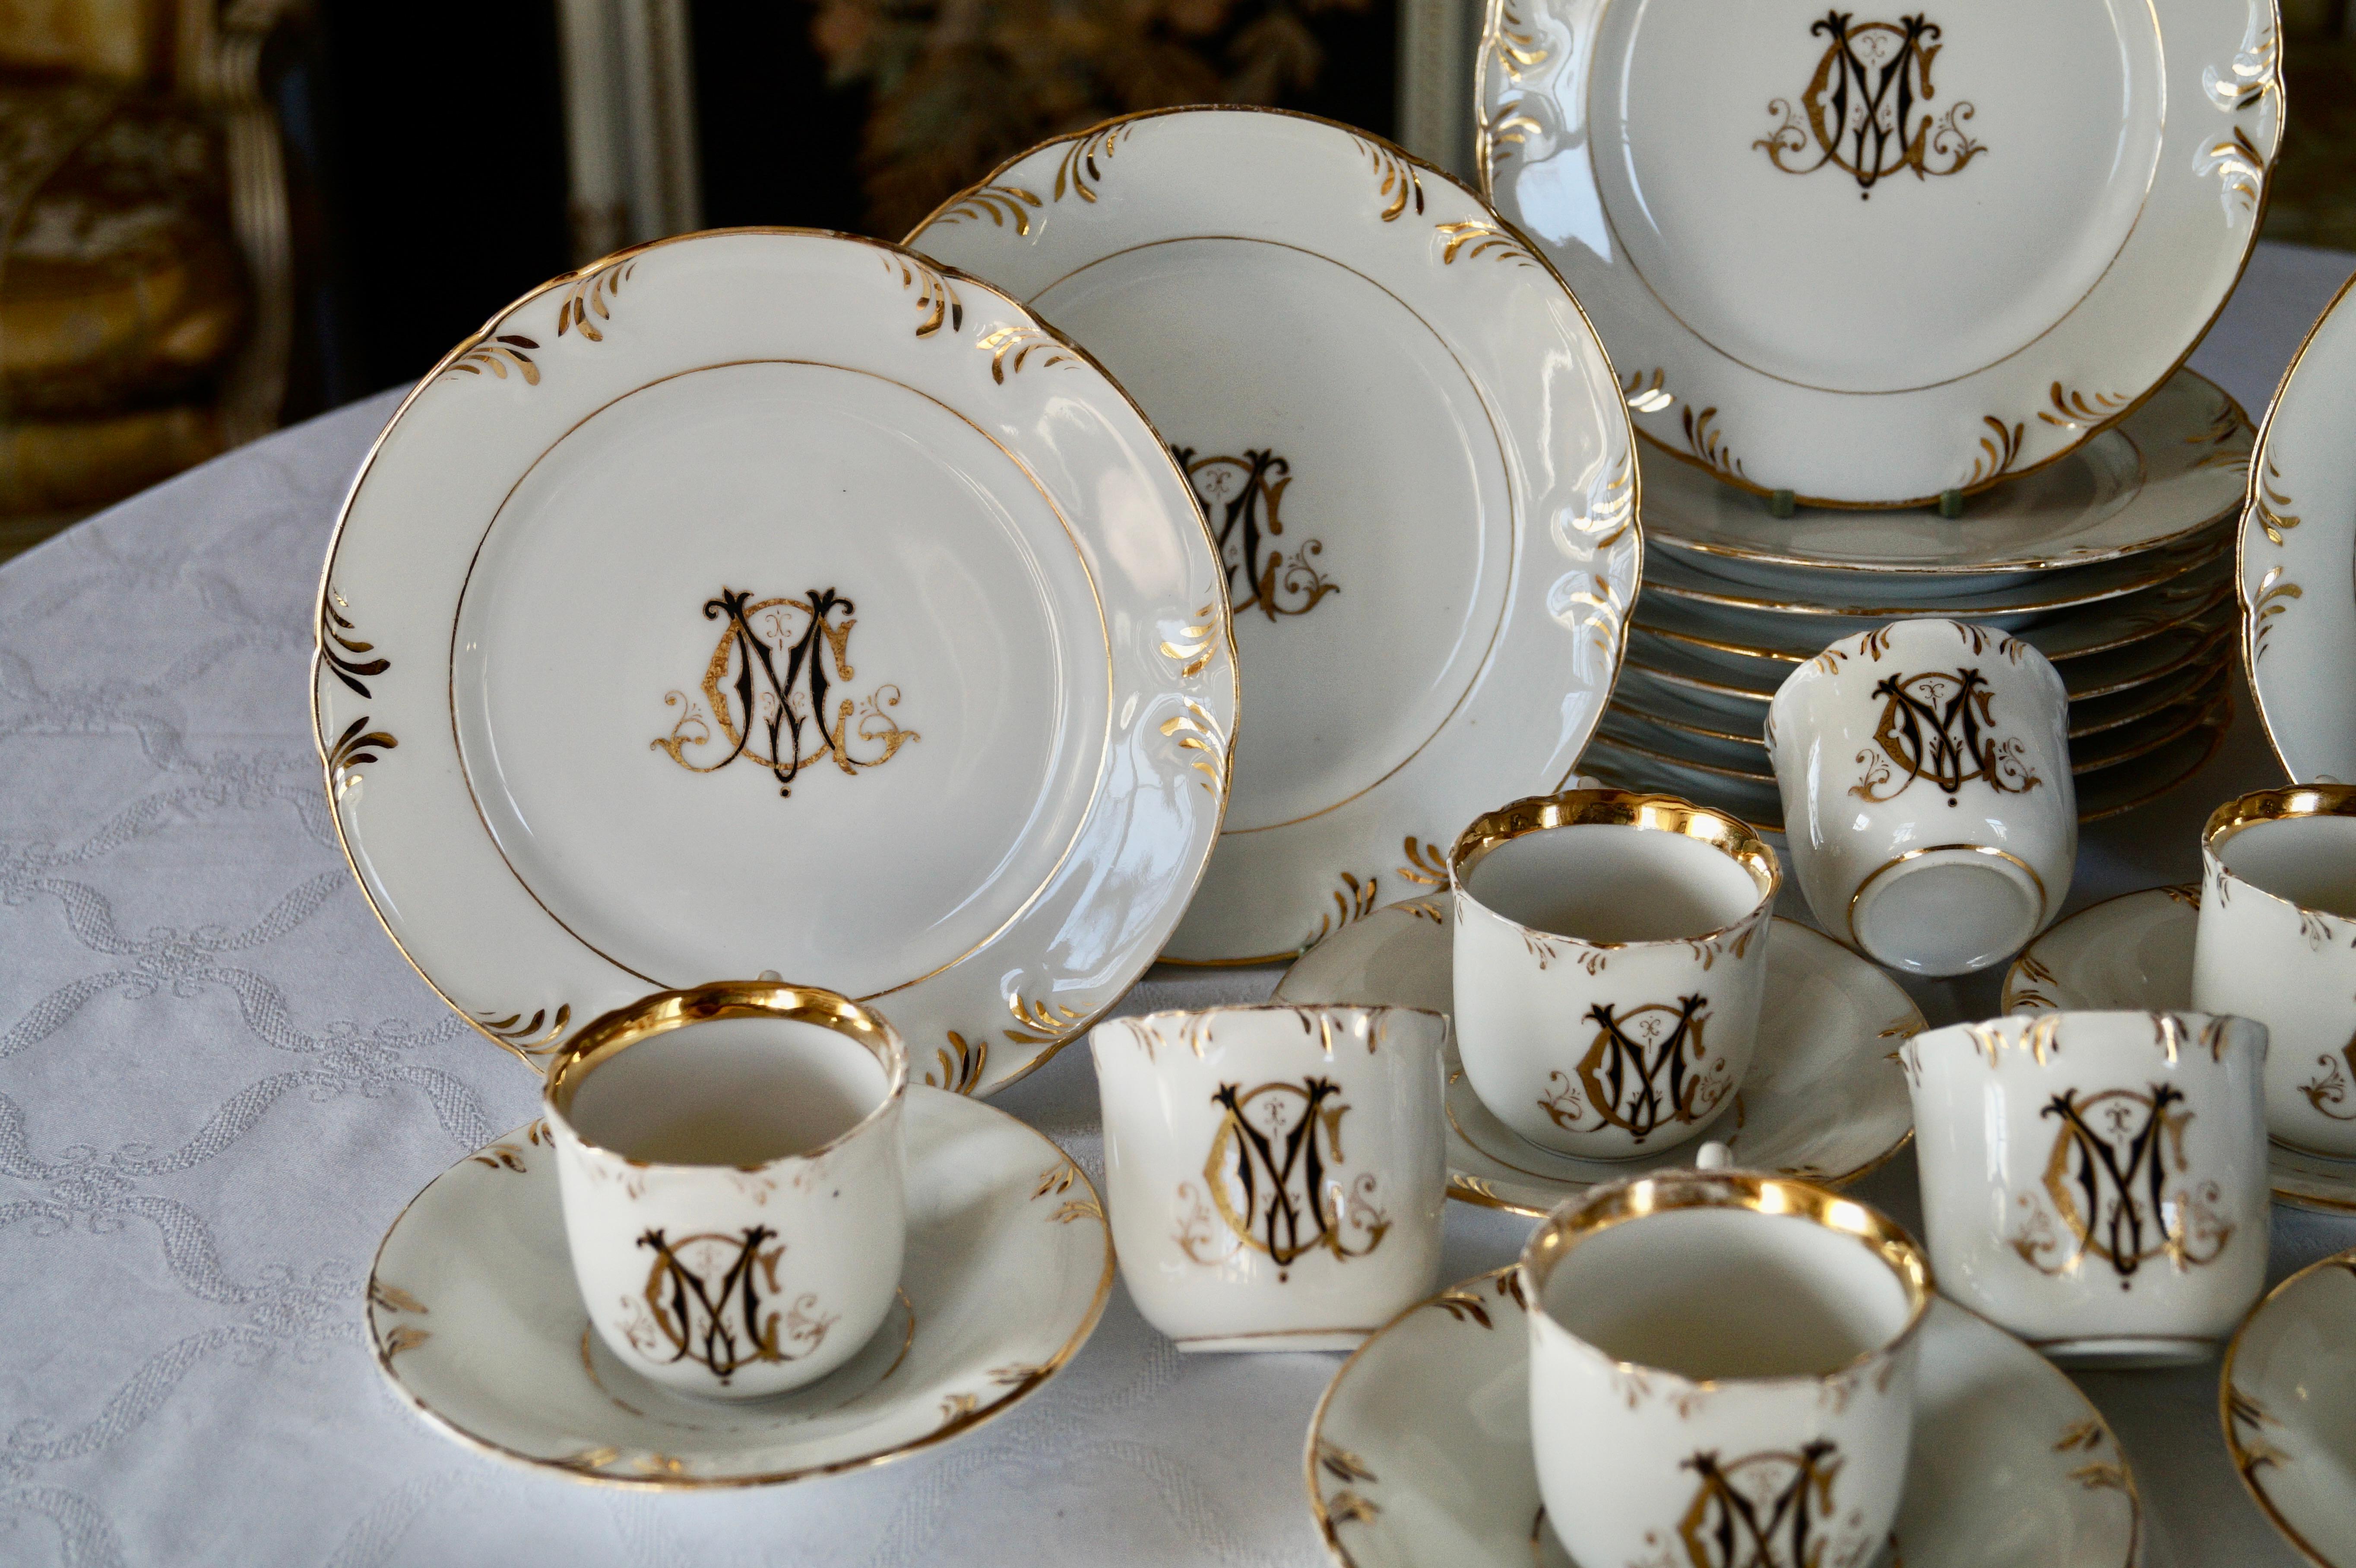 Beautiful set Old Paris porcelain cake pastry plates with 6 cups and saucers and 4 cups without saucers.

The plates is decorated with a rococo style edge of gold and has the Monogram 